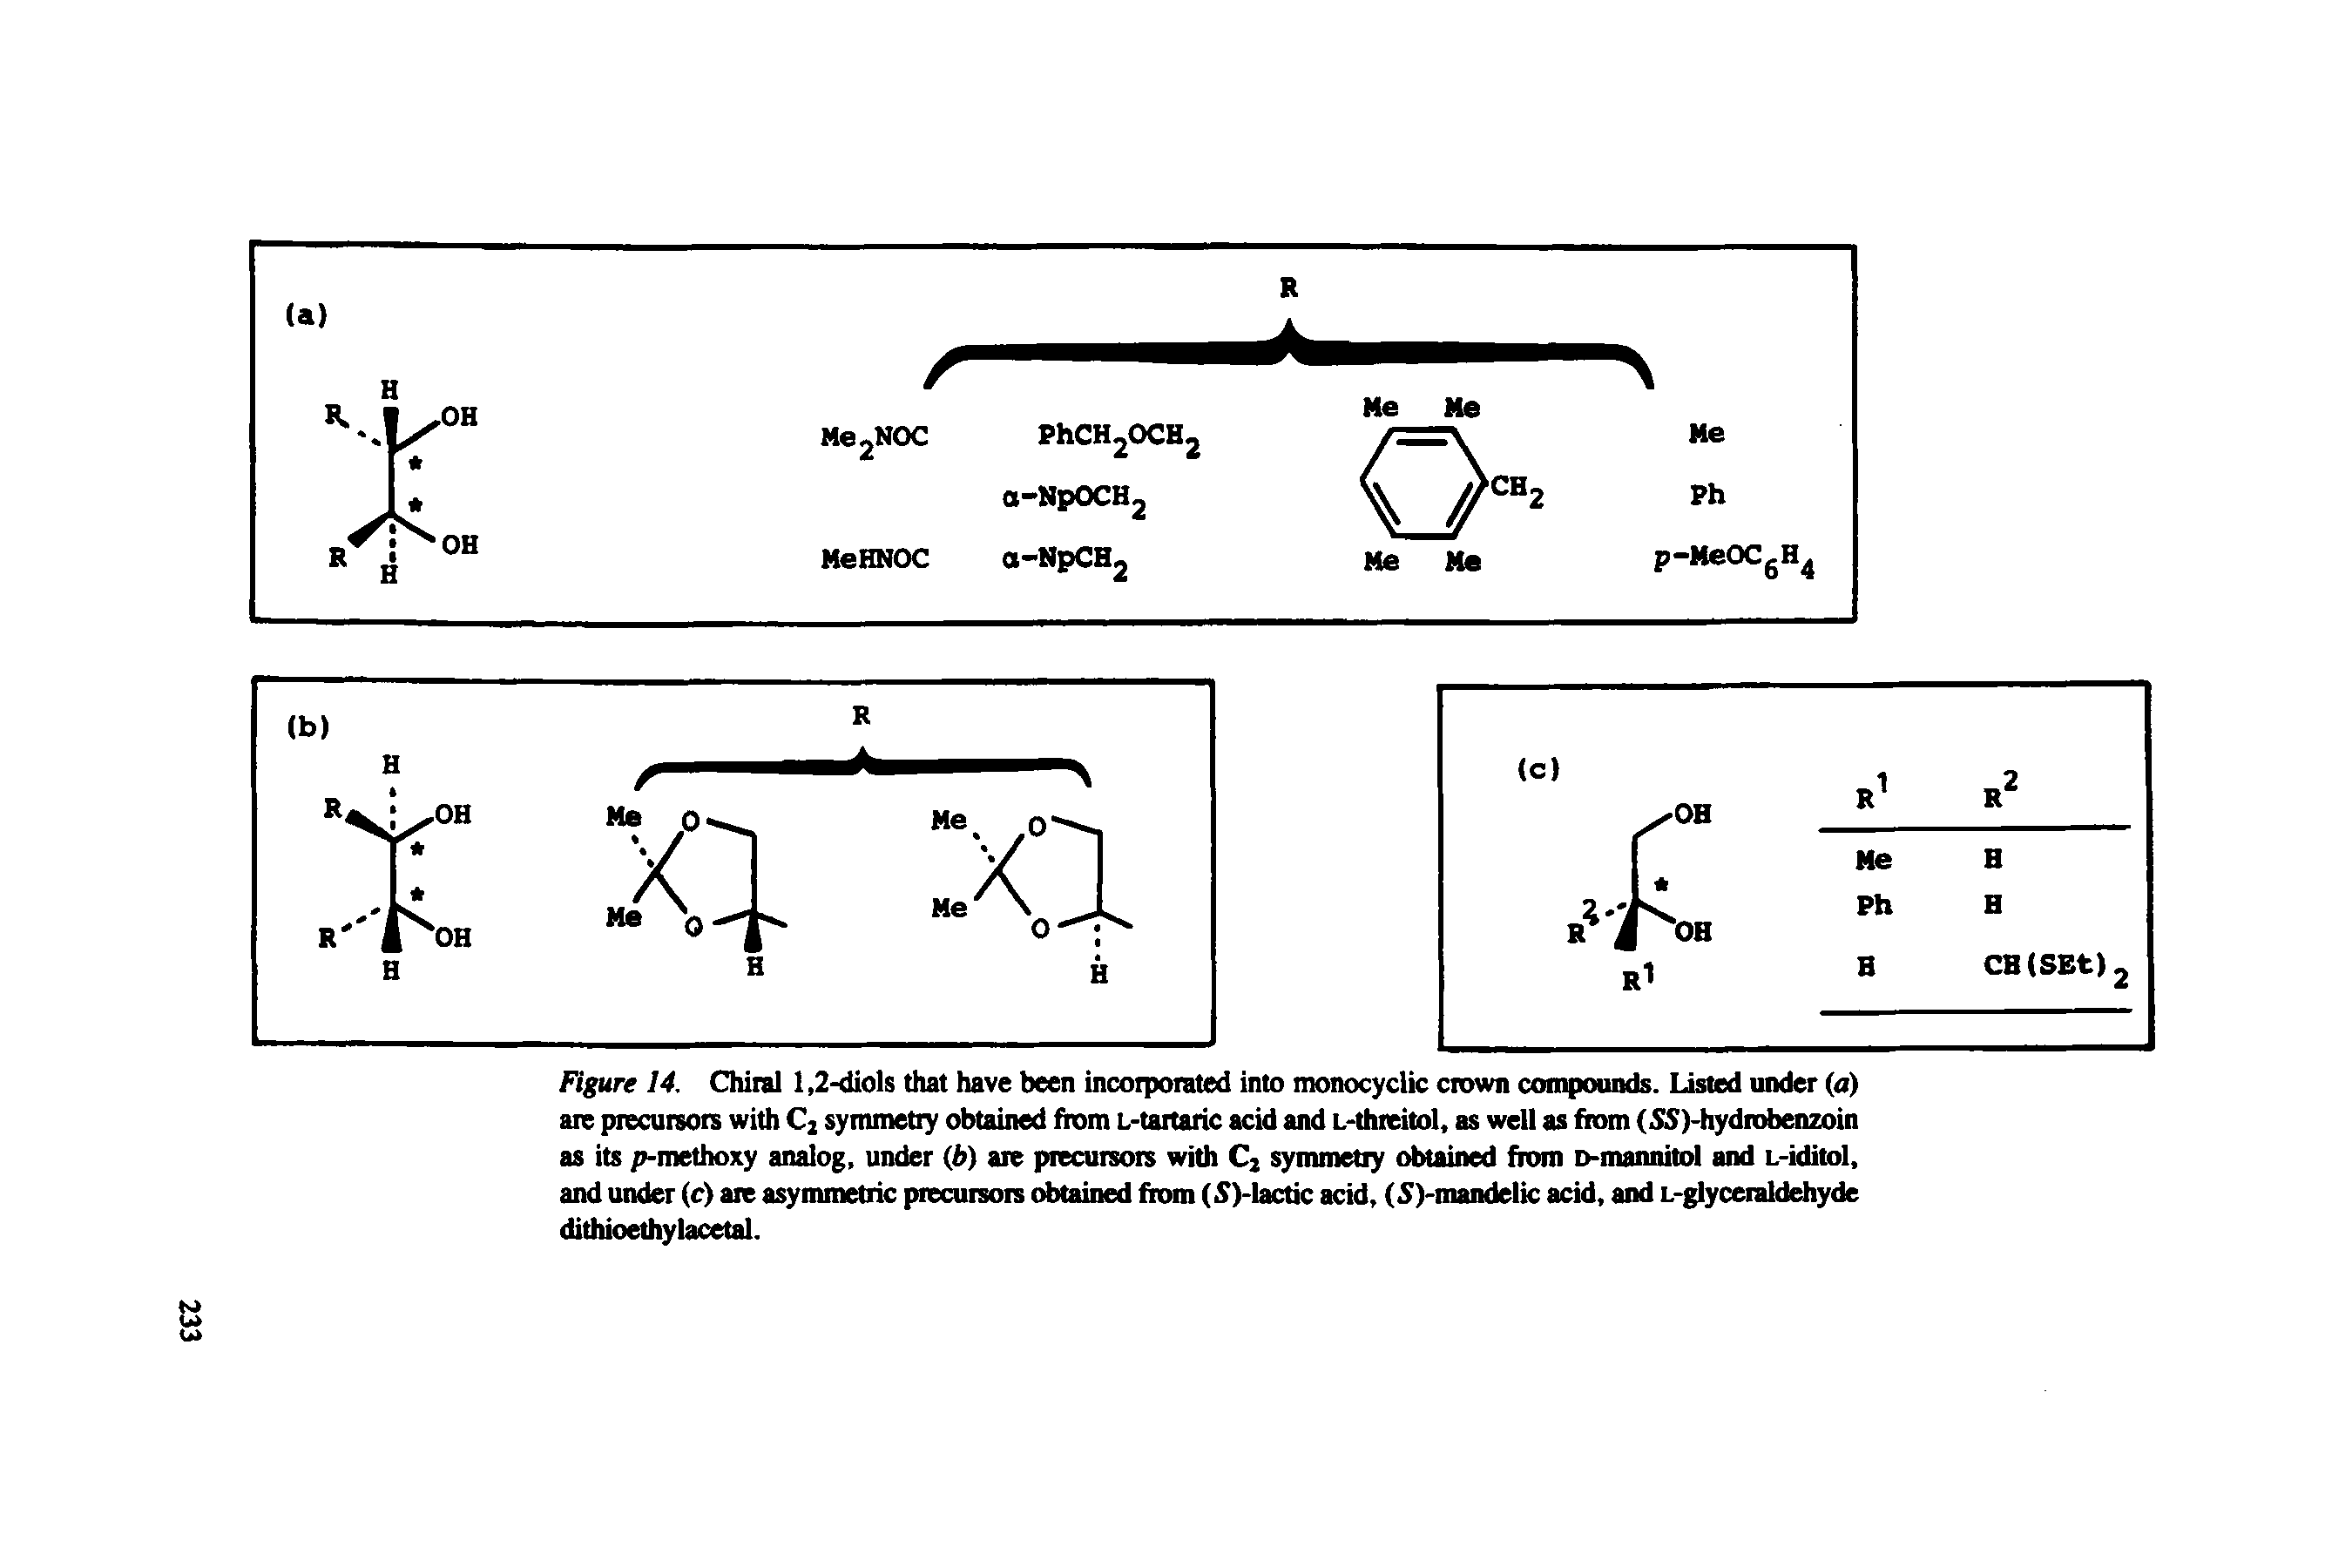 Figure 14. Chiral 1,2-diols that have been incorporated into monocyclic crown compounds. Listed under (o) are piecursors with C2 symmetry obtained from L-taitaric acid and L-thieitol, as well as from (5S)-hydrobenzoin as its p-methoxy analog, under (b) are precursors with Cj symmetiy obtained from D-mannitol and L-iditol, and under (c) are asymmetric precursors obtained from (5)-lactic acid, (5)-mandelic acid, and L-glyceraldehyde dithioethylacetal.